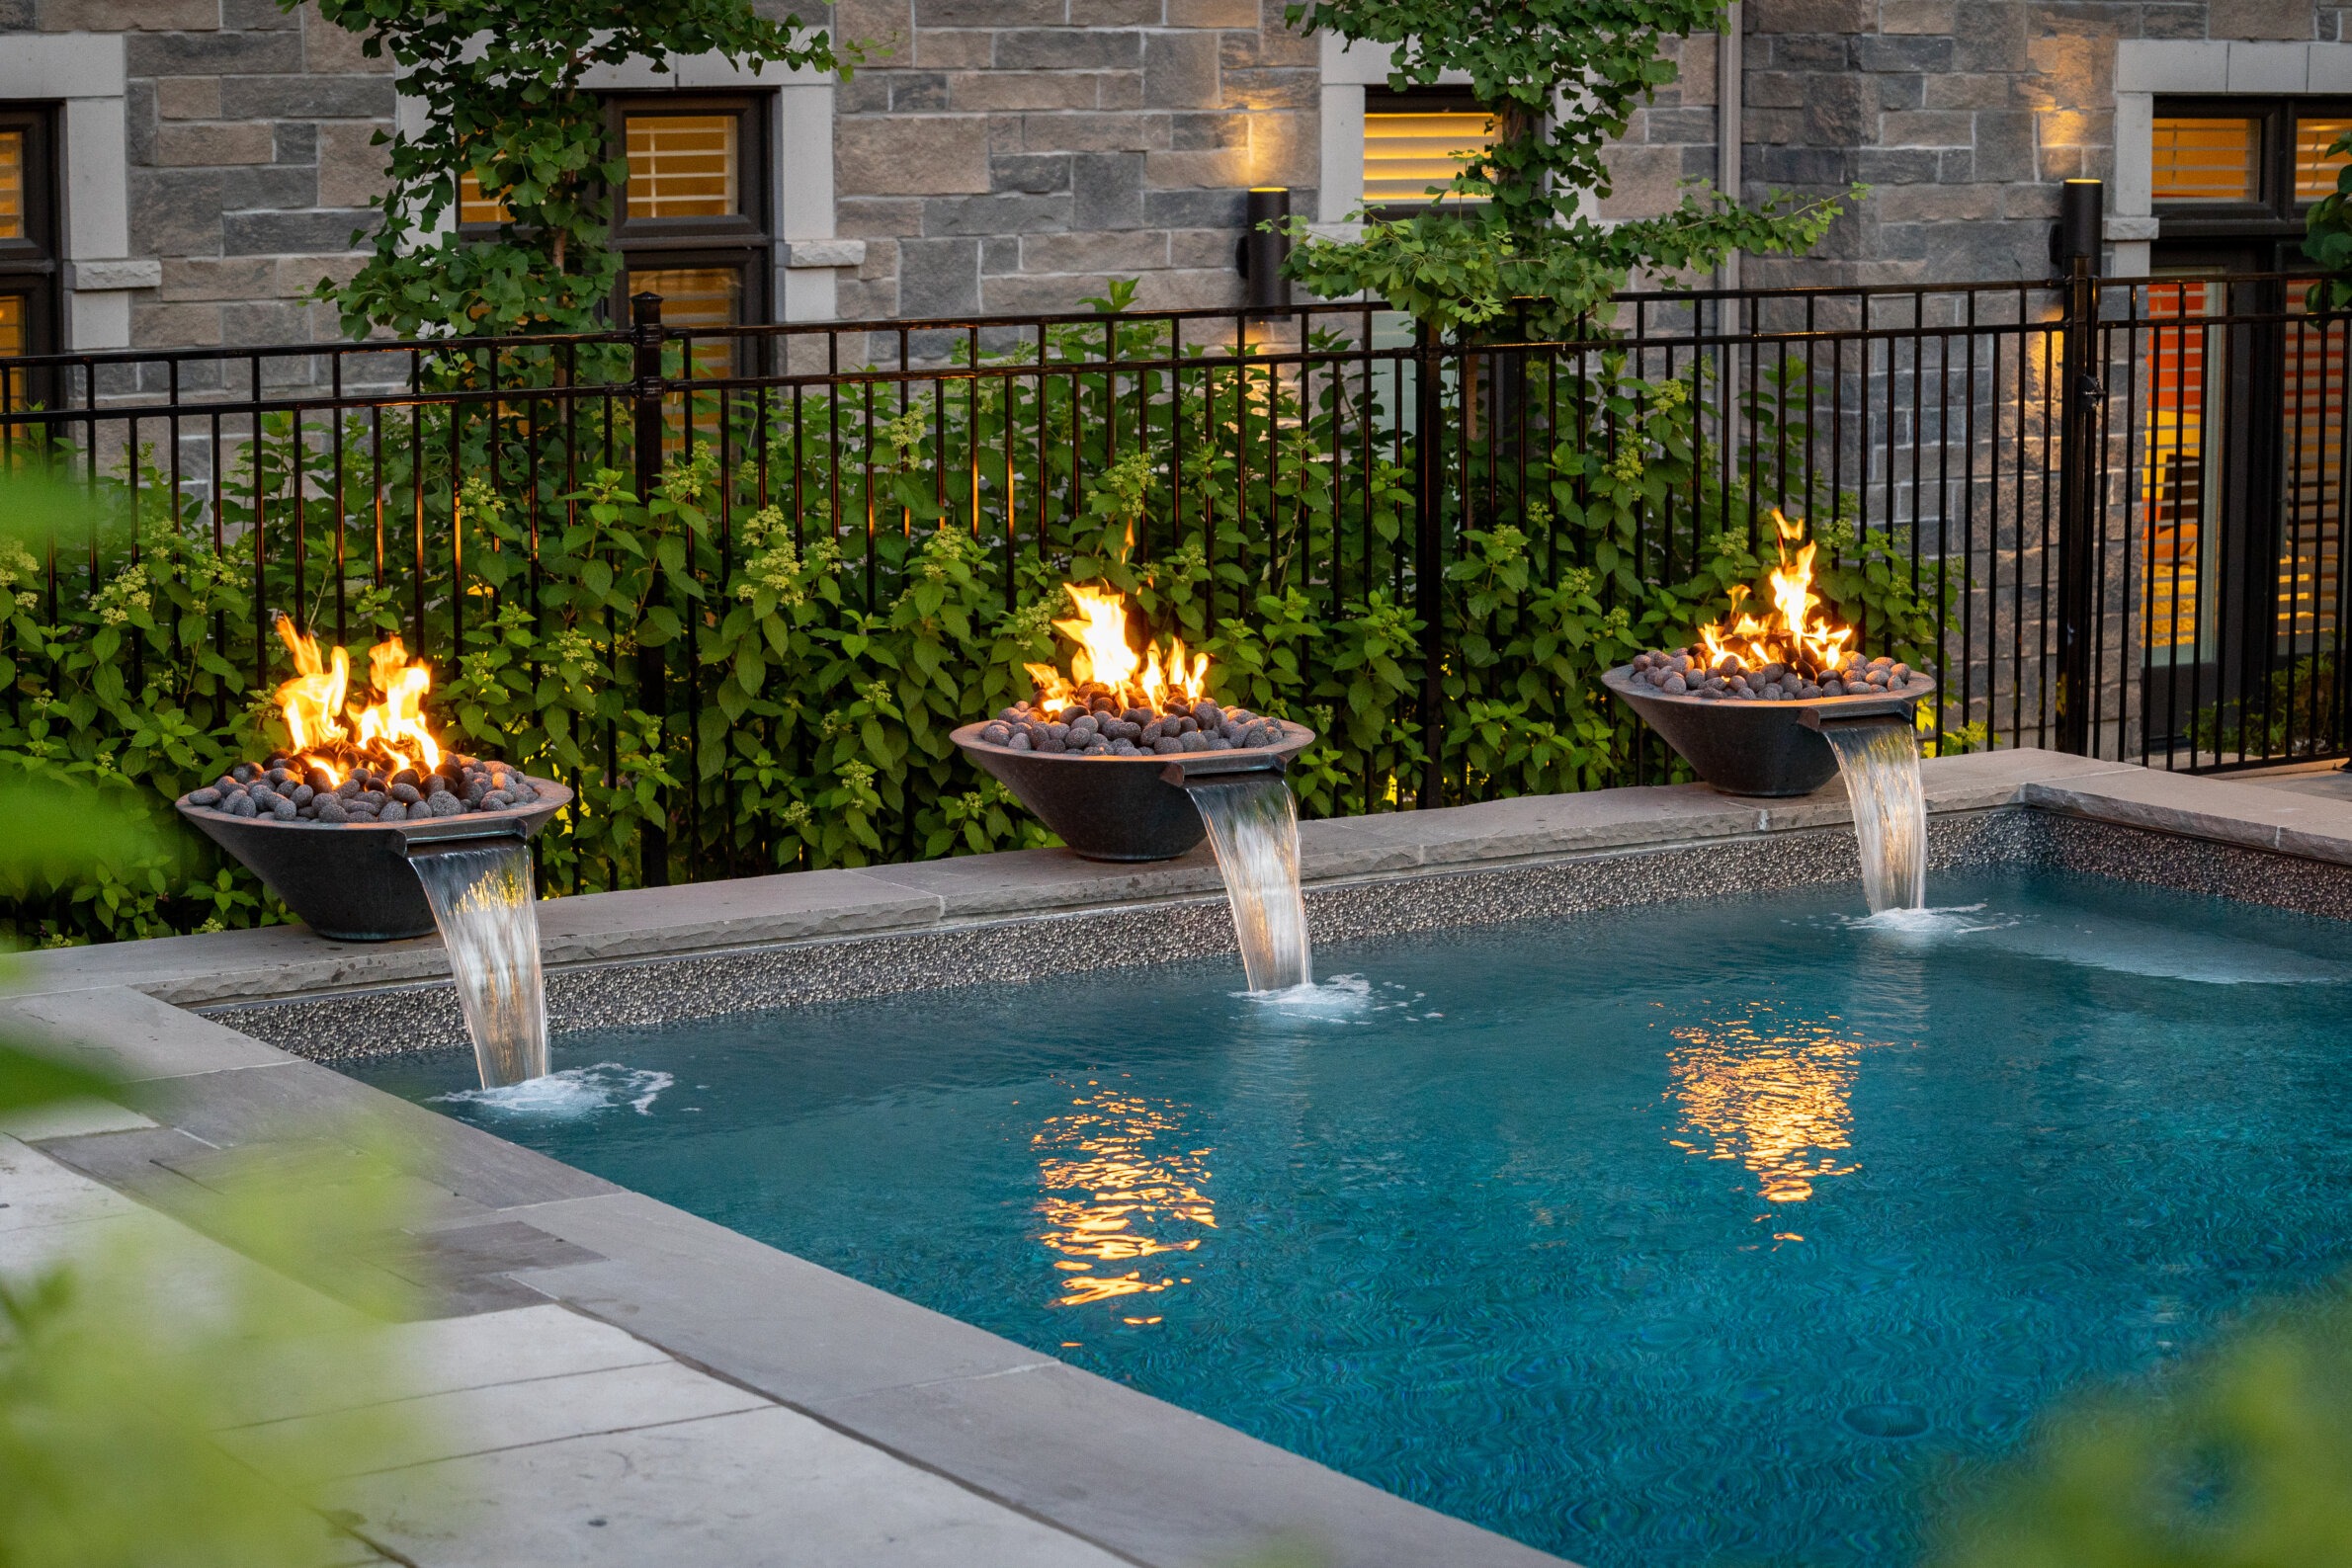 An outdoor pool at dusk features three fire bowls with waterfalls, set against a stone building and green foliage, creating a tranquil, luxurious ambiance.